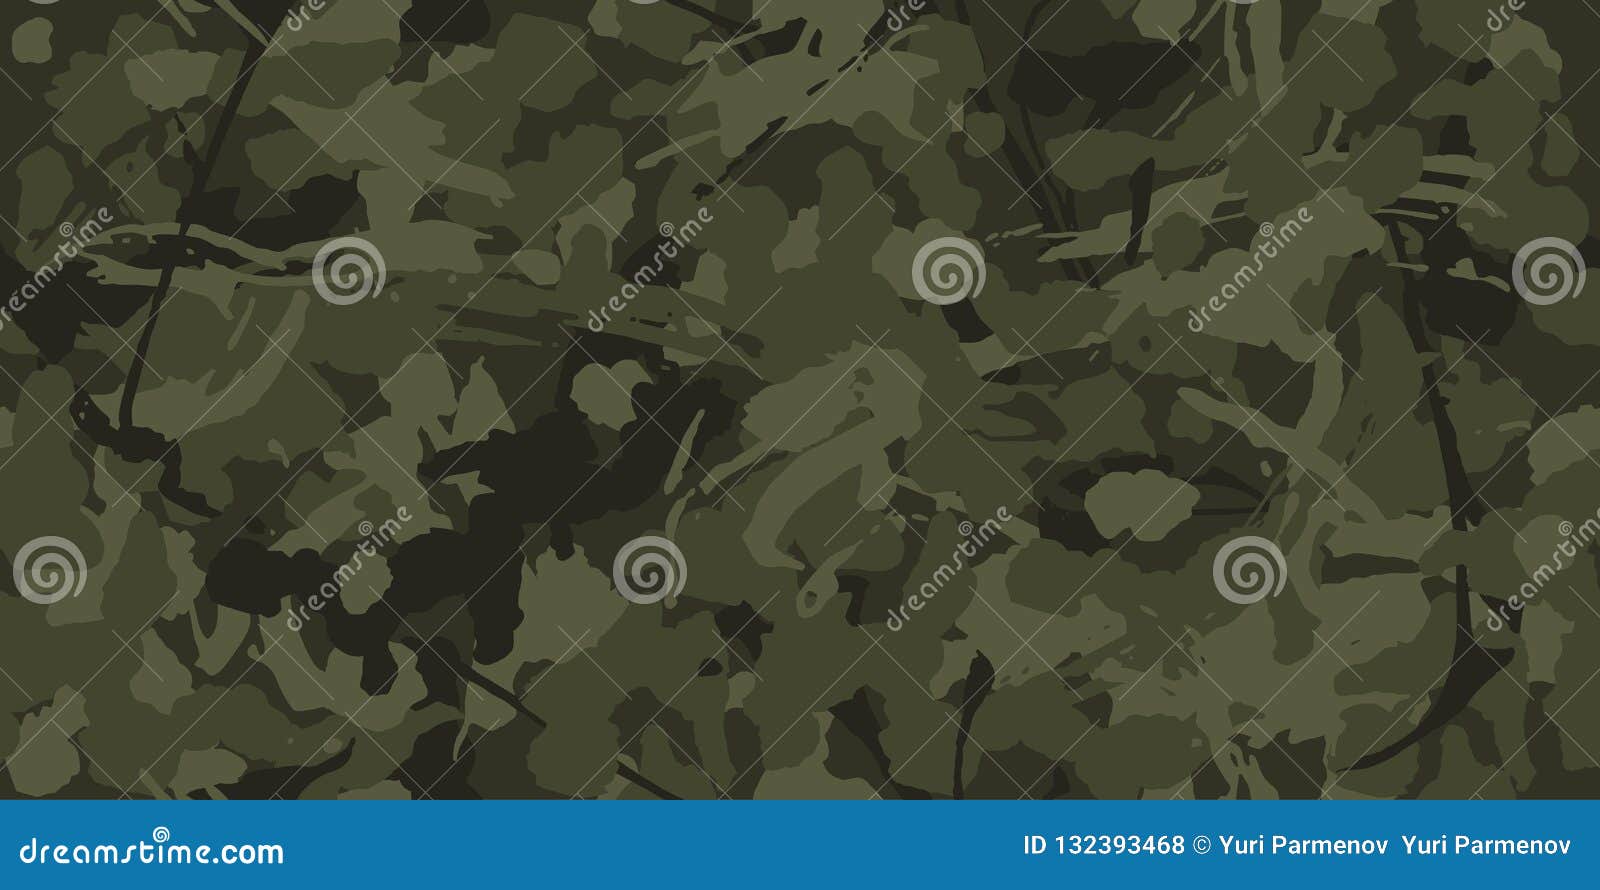 military camouflage, texture repeats seamless. camo pattern for army clothing.